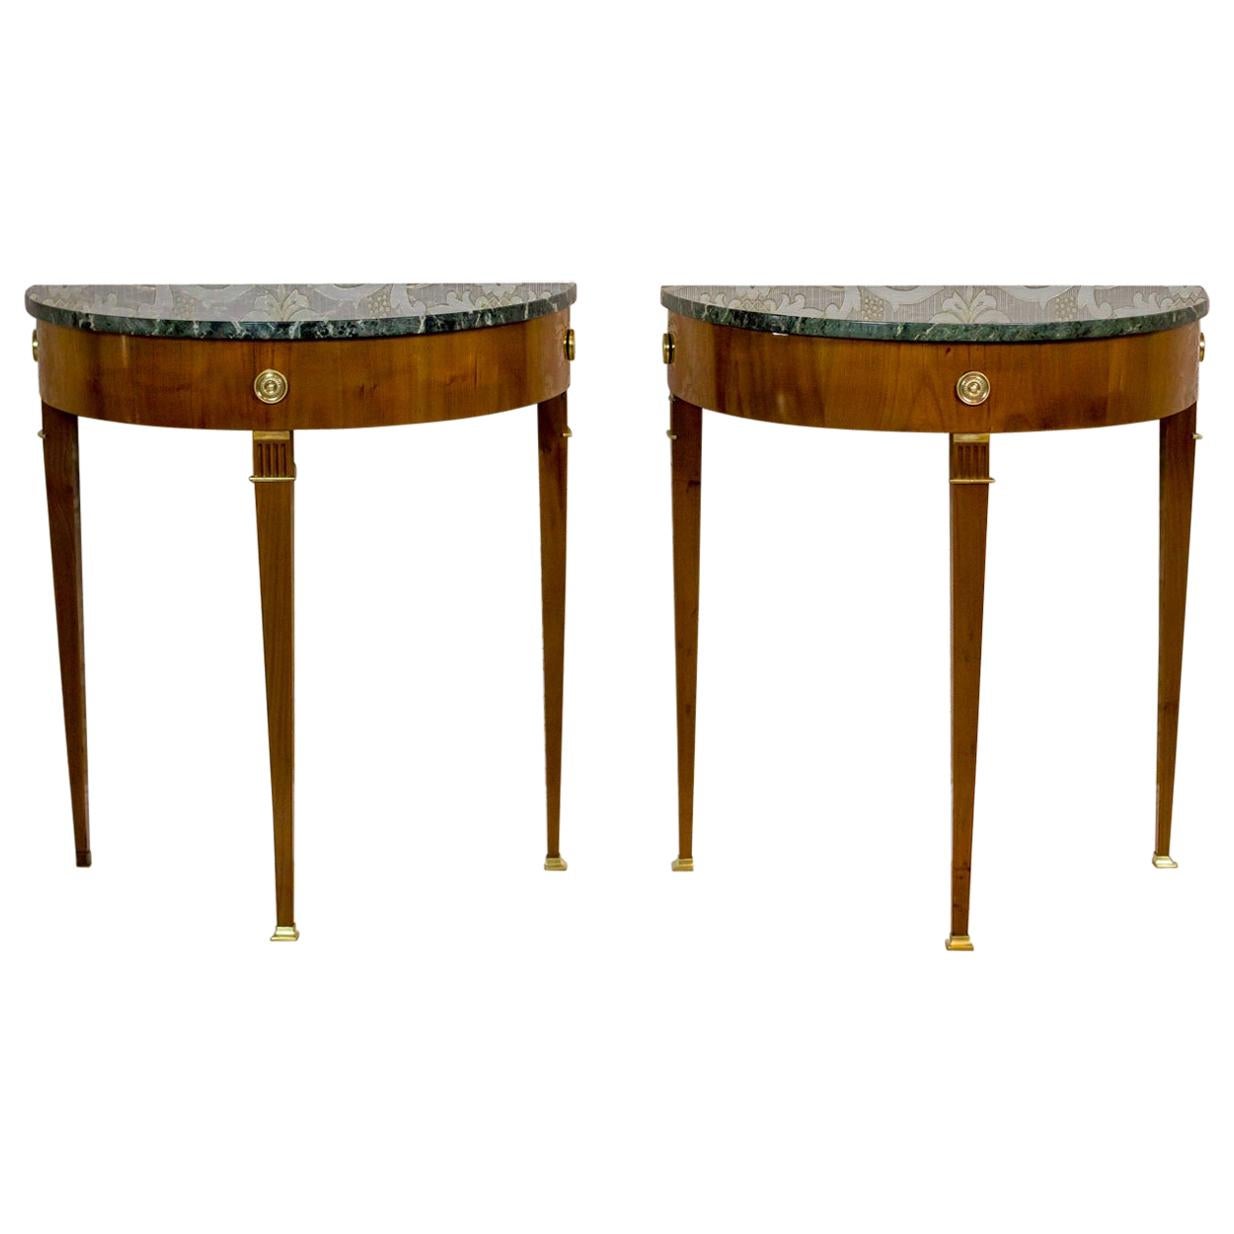 Two French Neoclassicistic Wall Tables/Console Tables, 19th Century